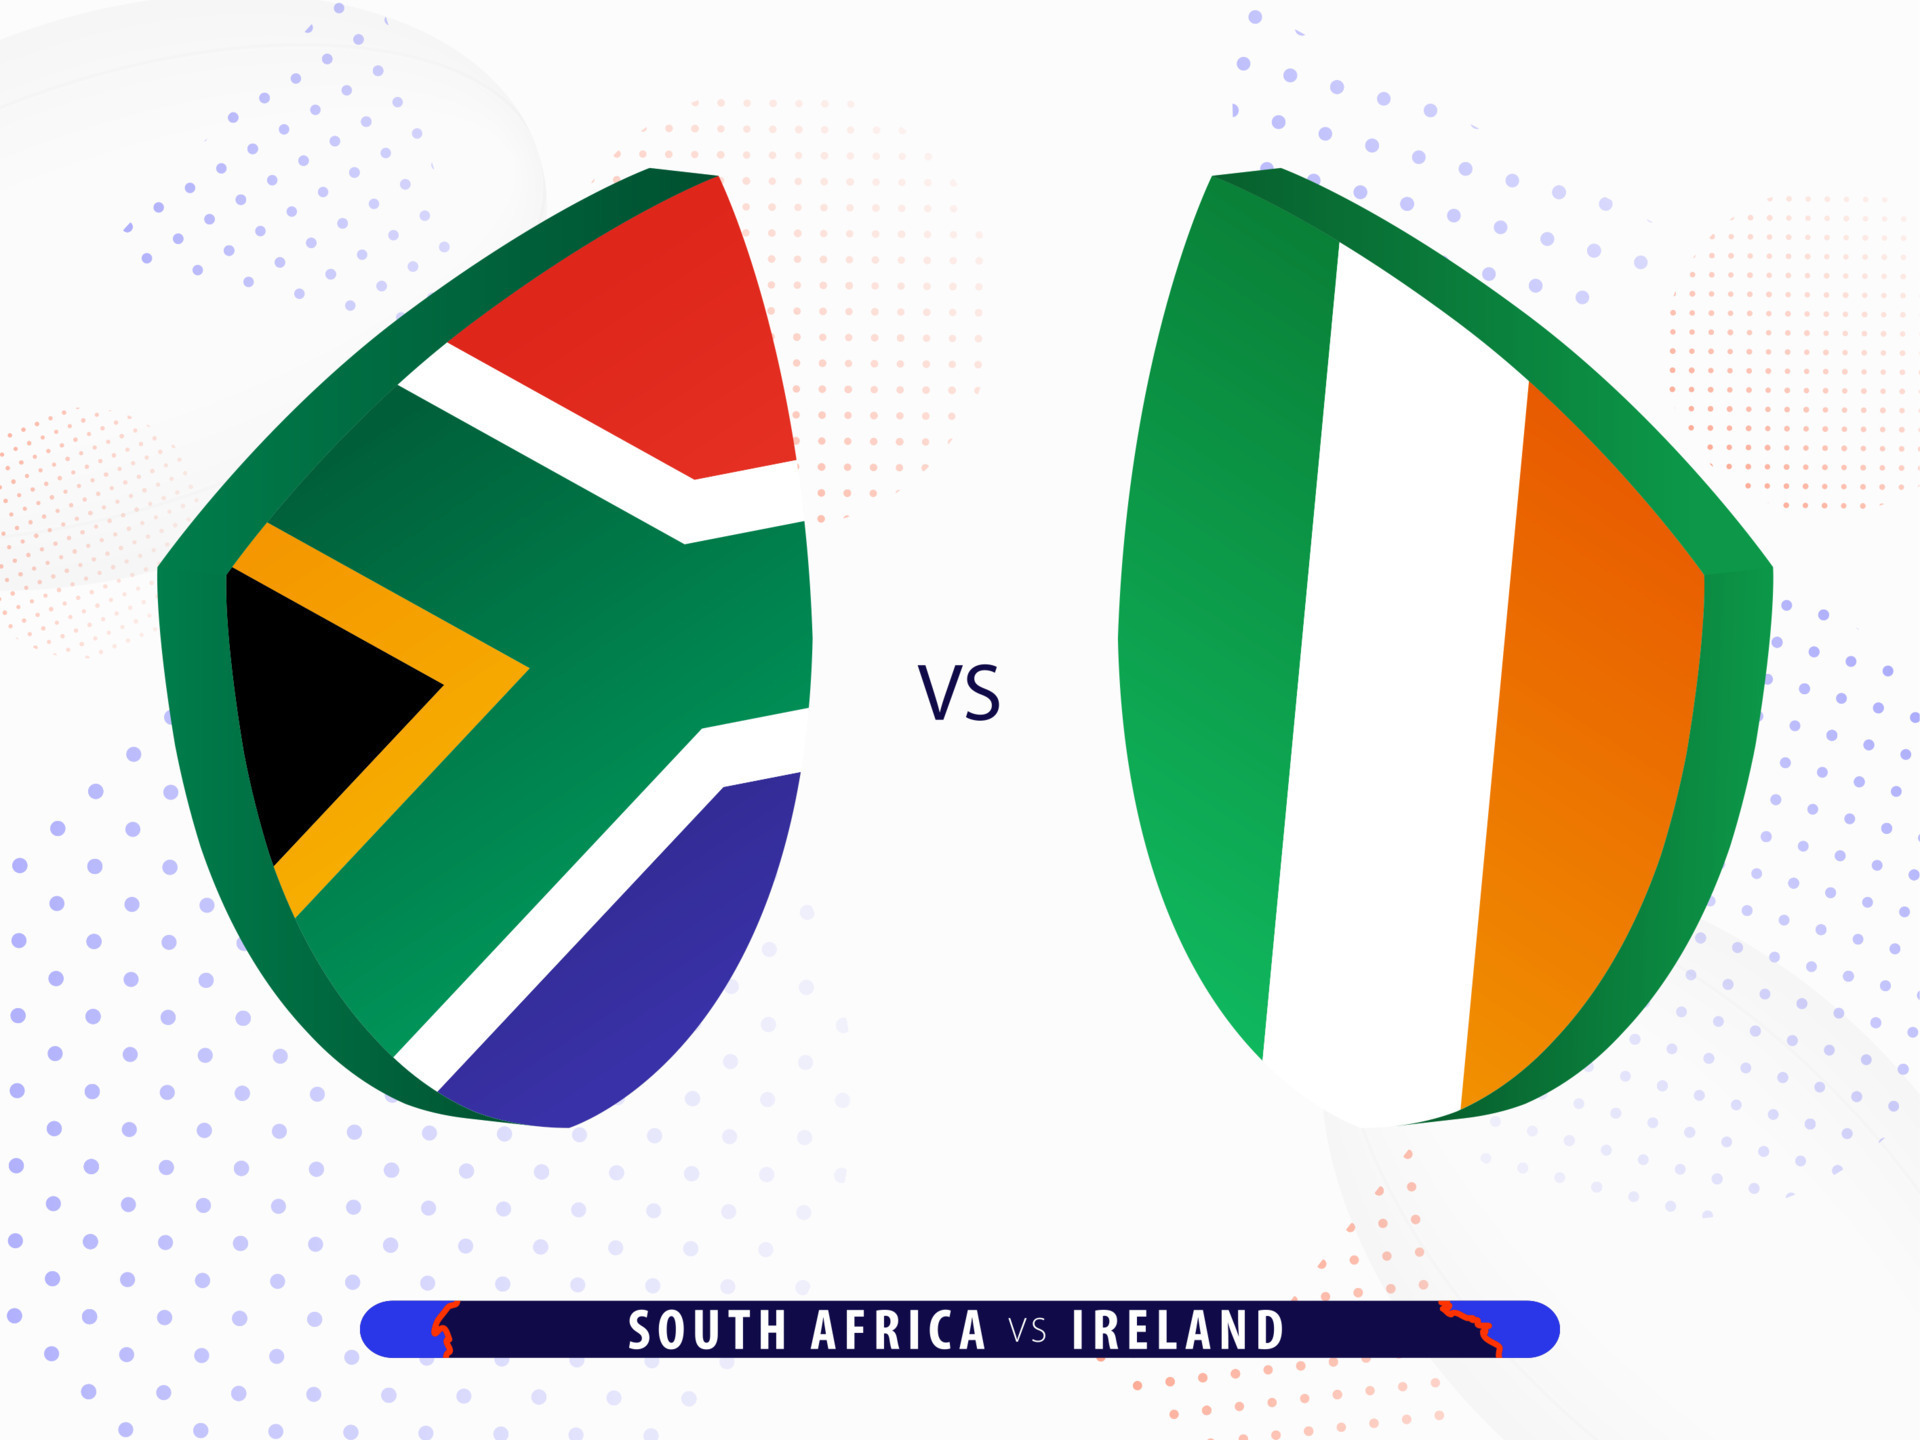 South Africa vs Ireland rugby match, international rugby competition 2023